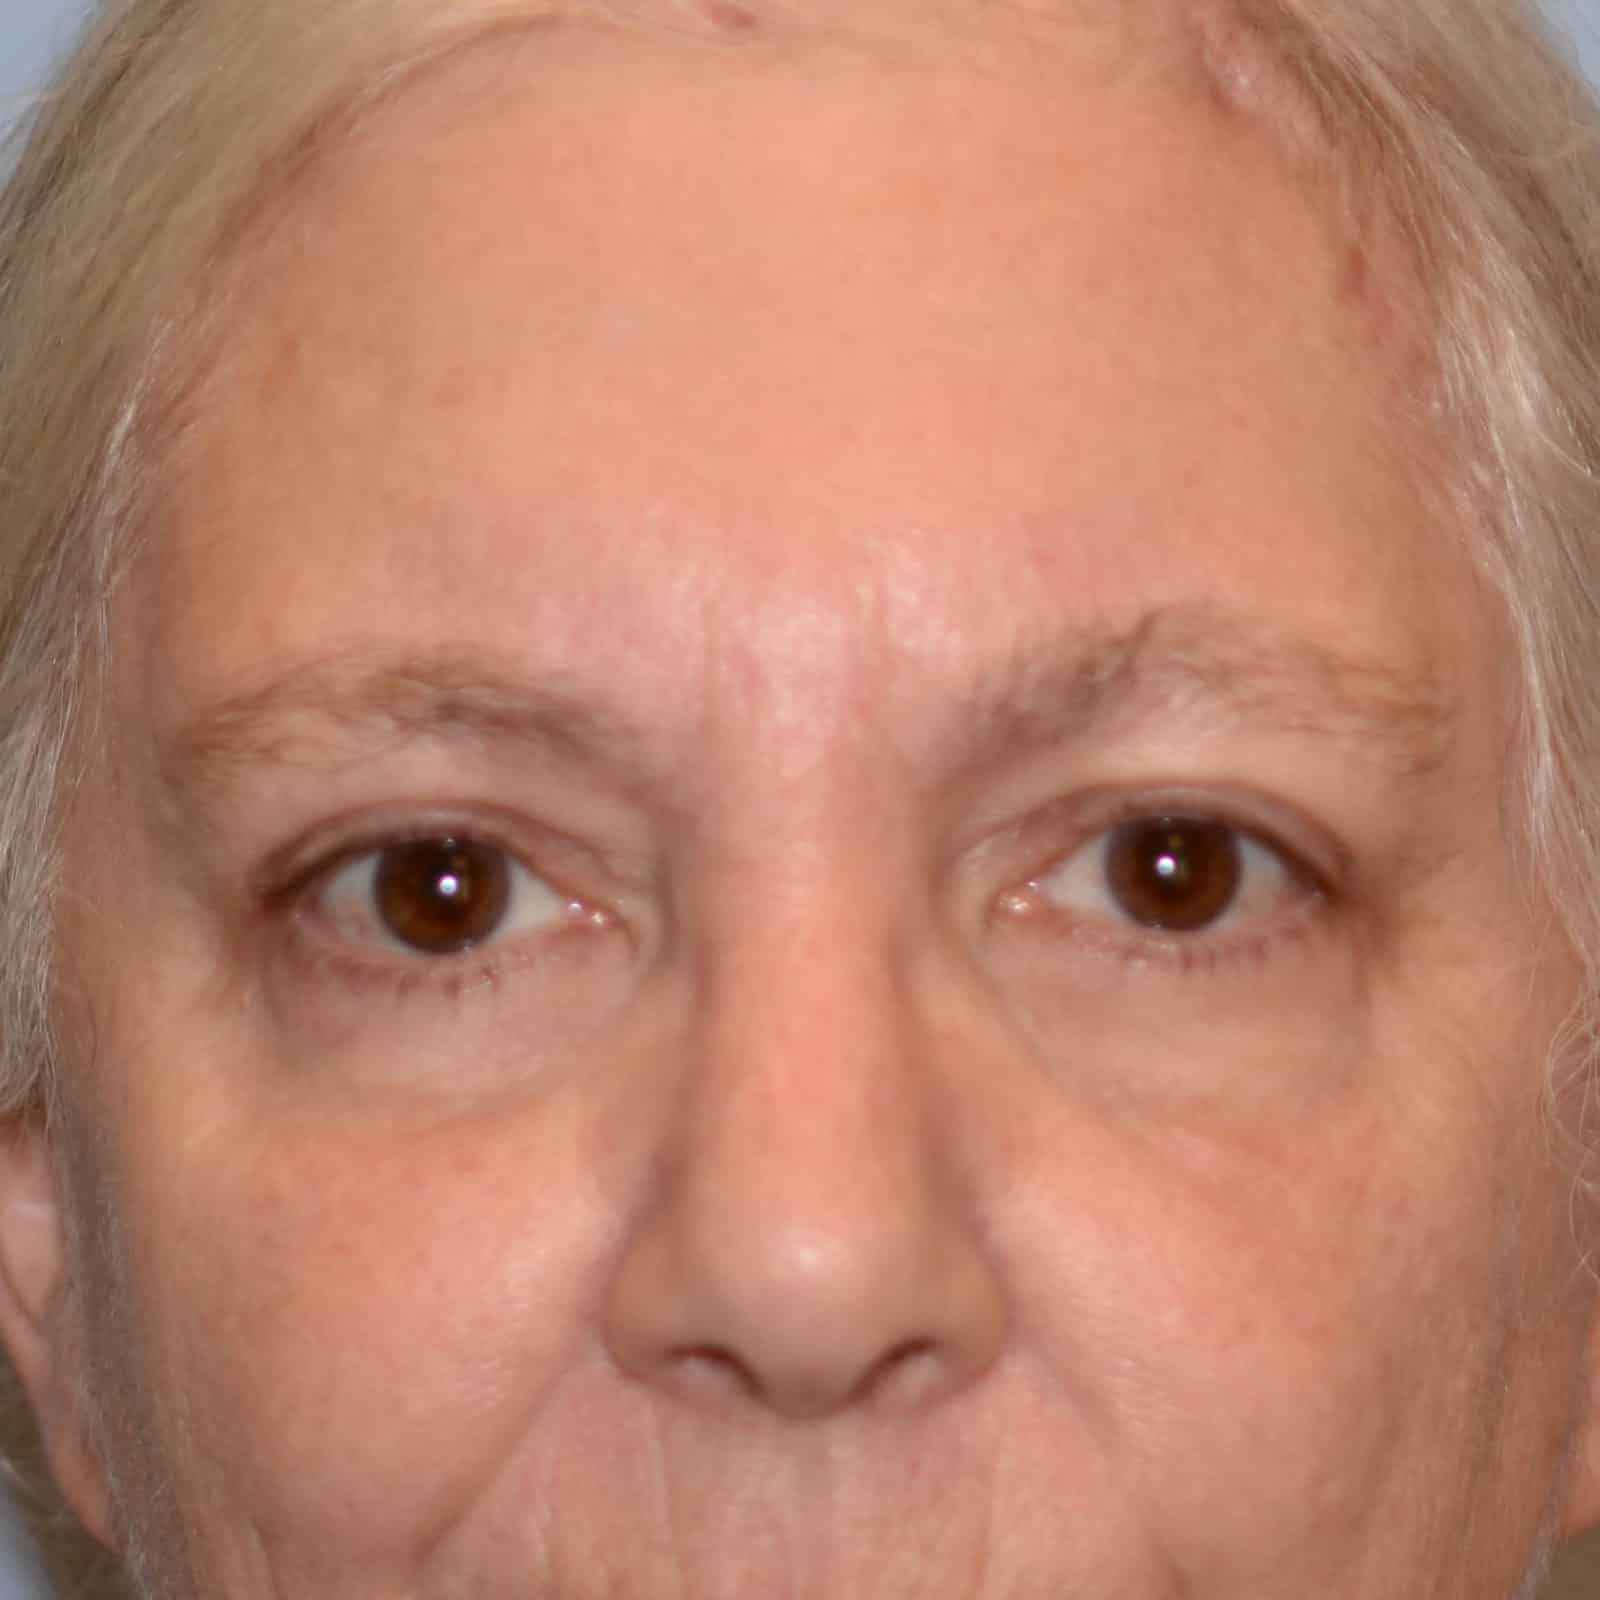 Upper Blepharoplasty and Brow Lift